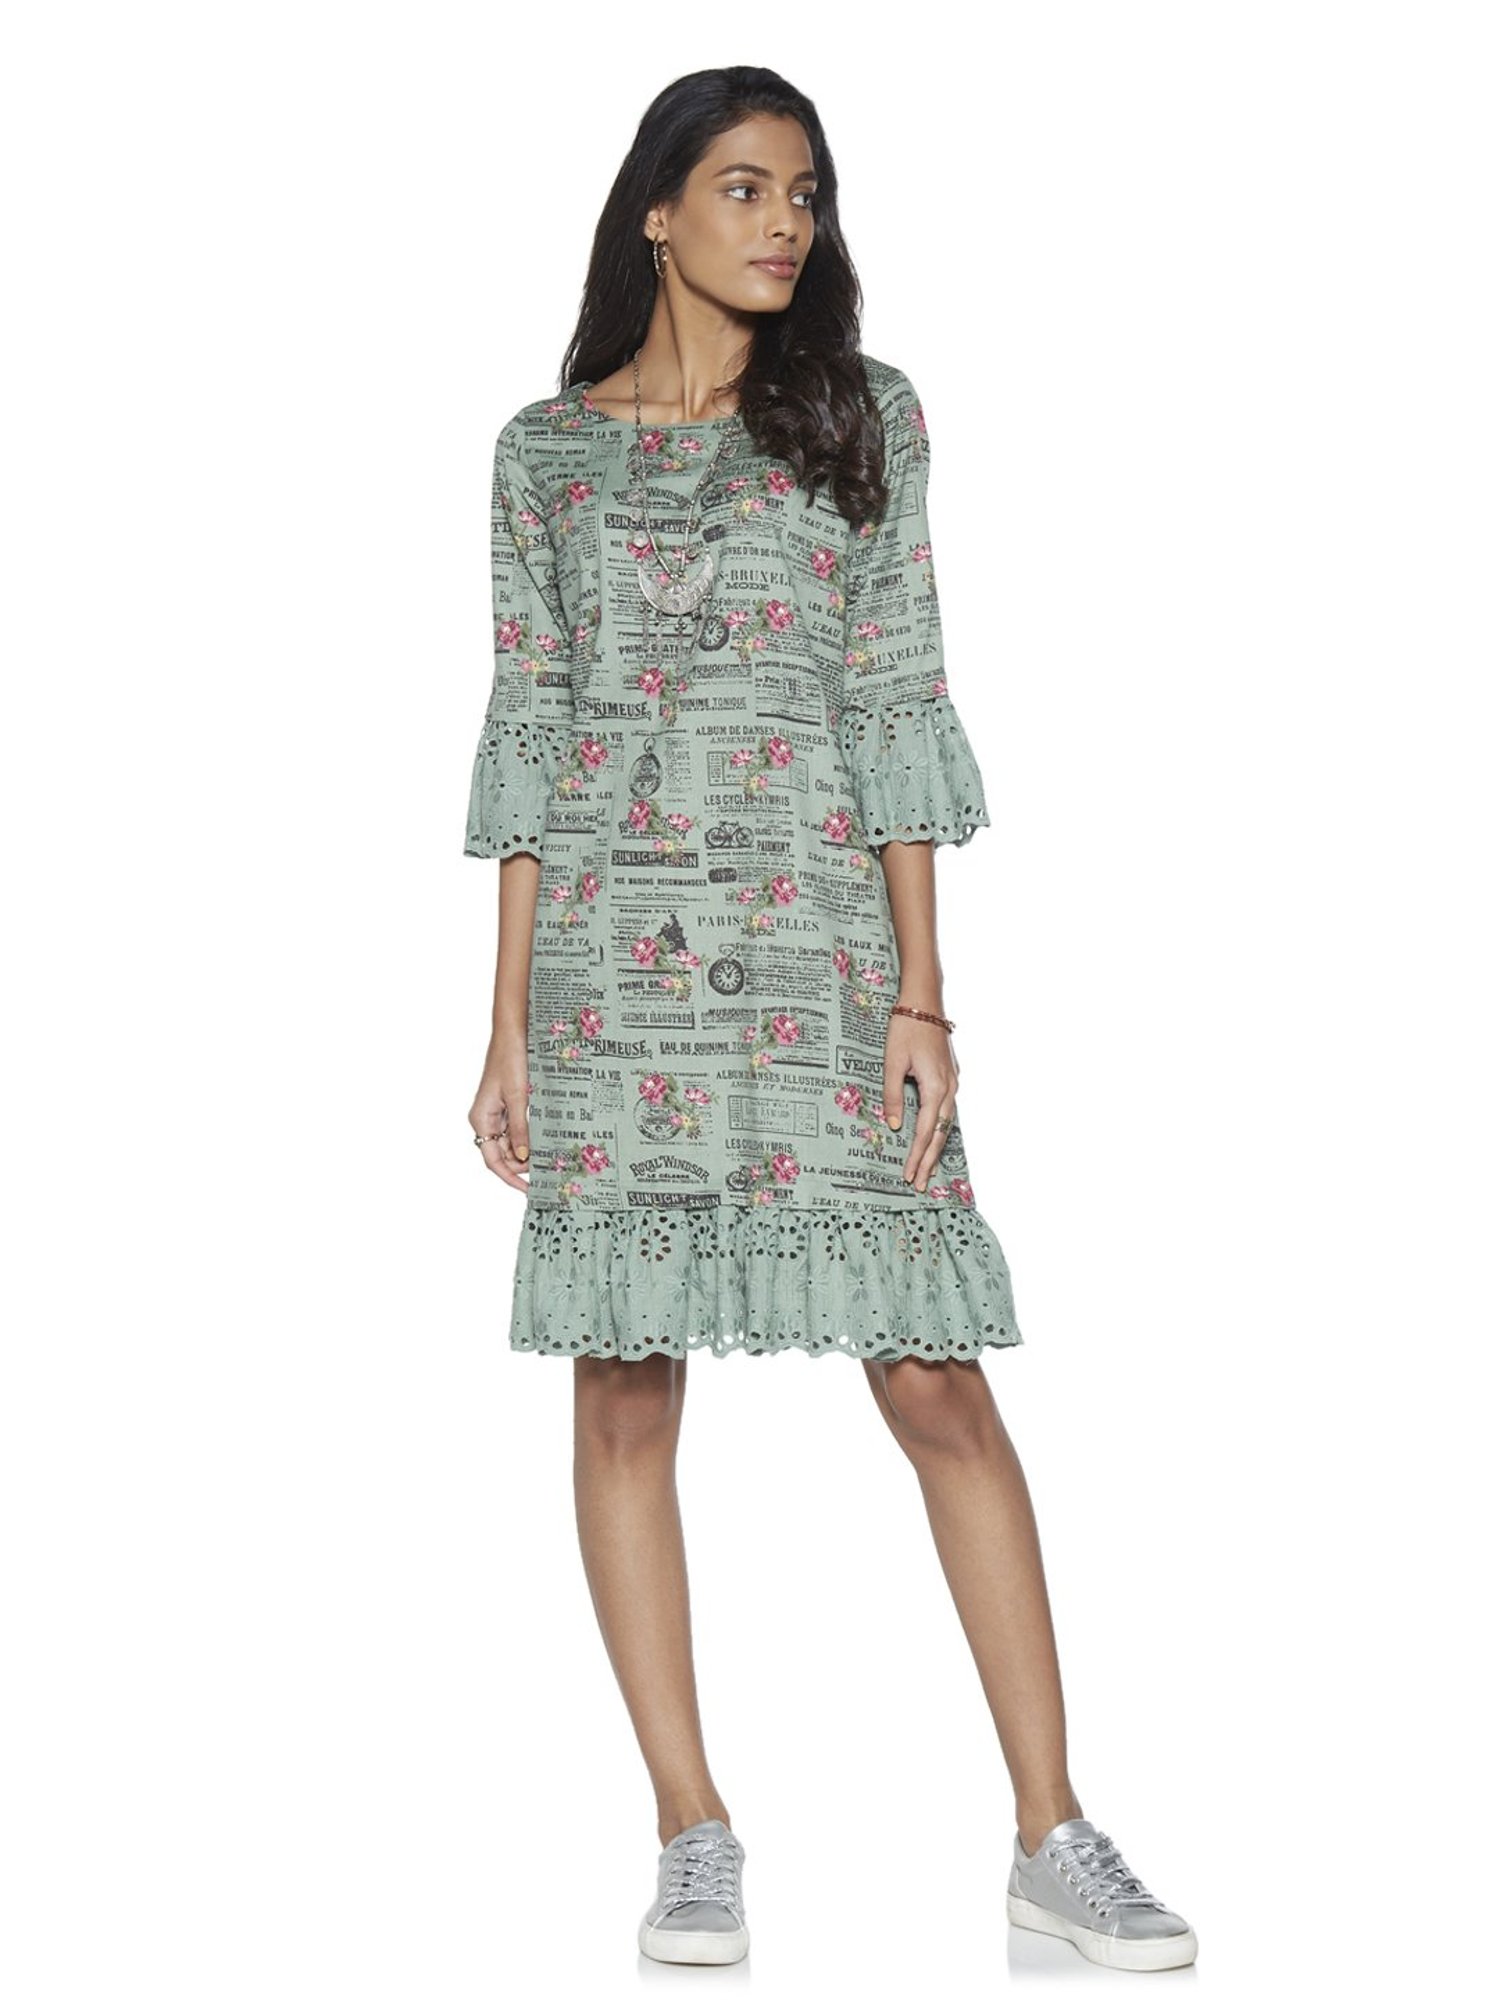 Bombay Paisley by Westside Printed Pink Dress